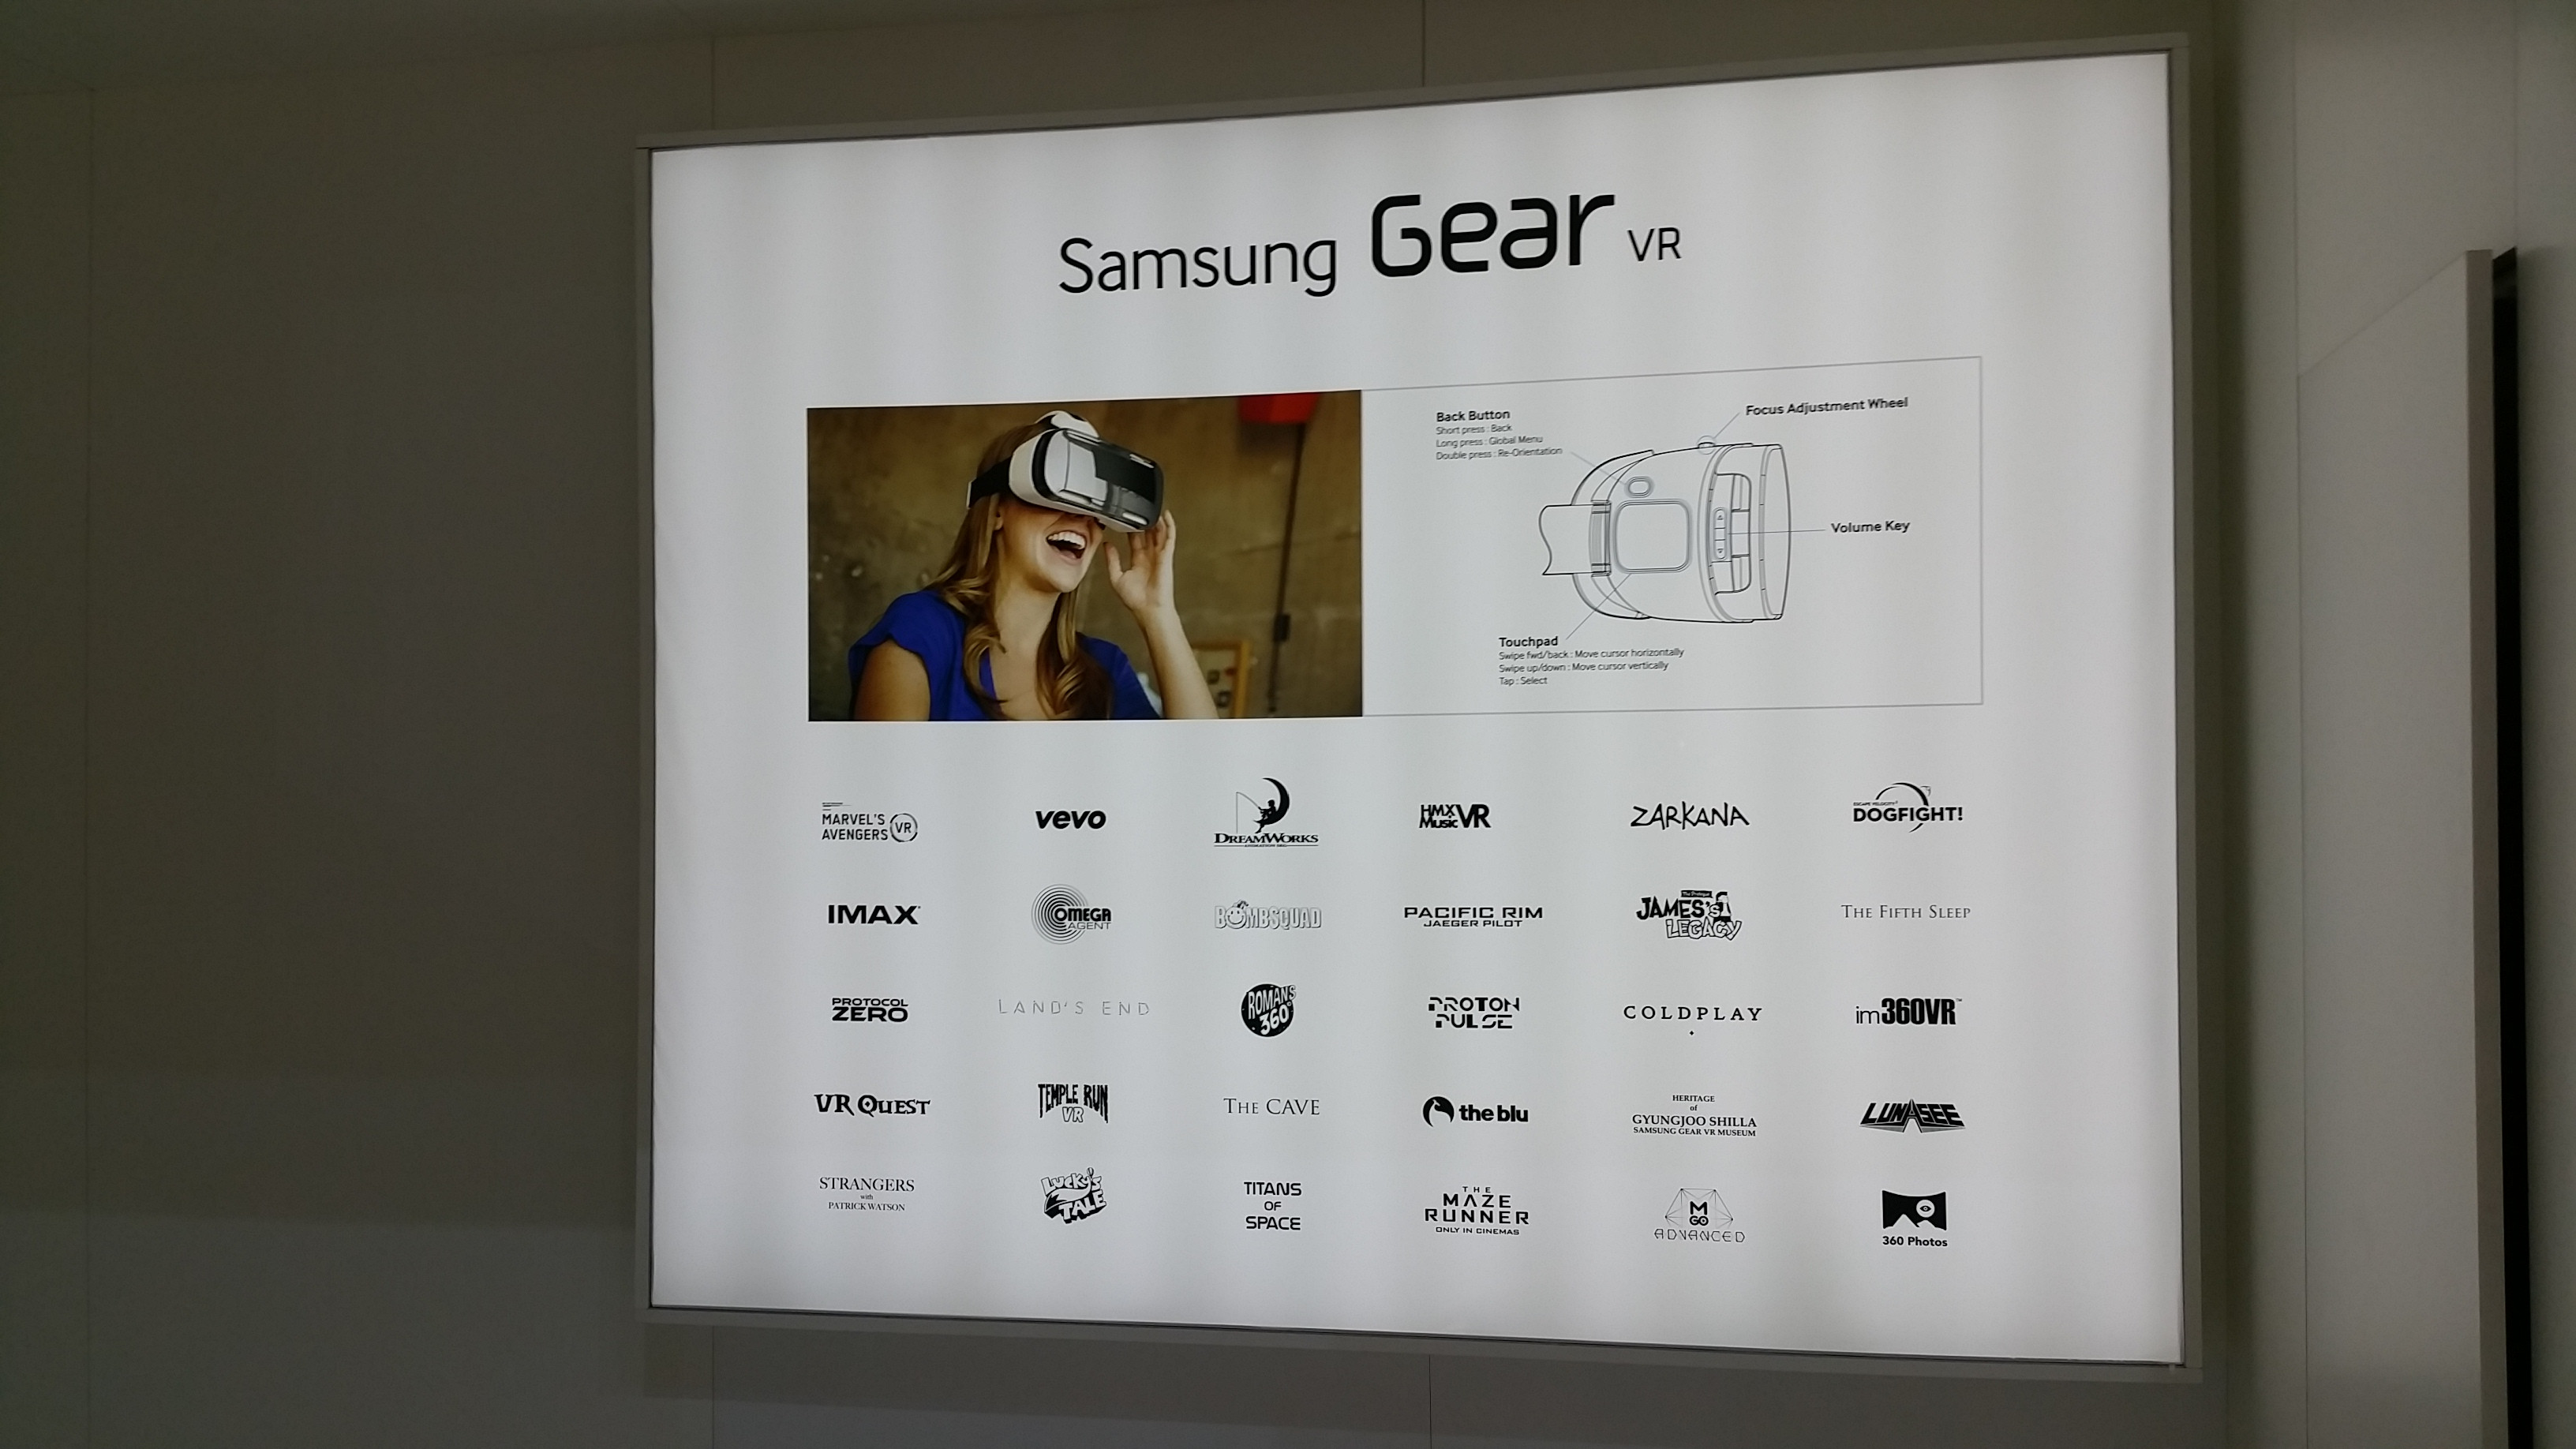 Proton Pulse featured at the Samsung Gear VR Launch event in Berlin, Germany